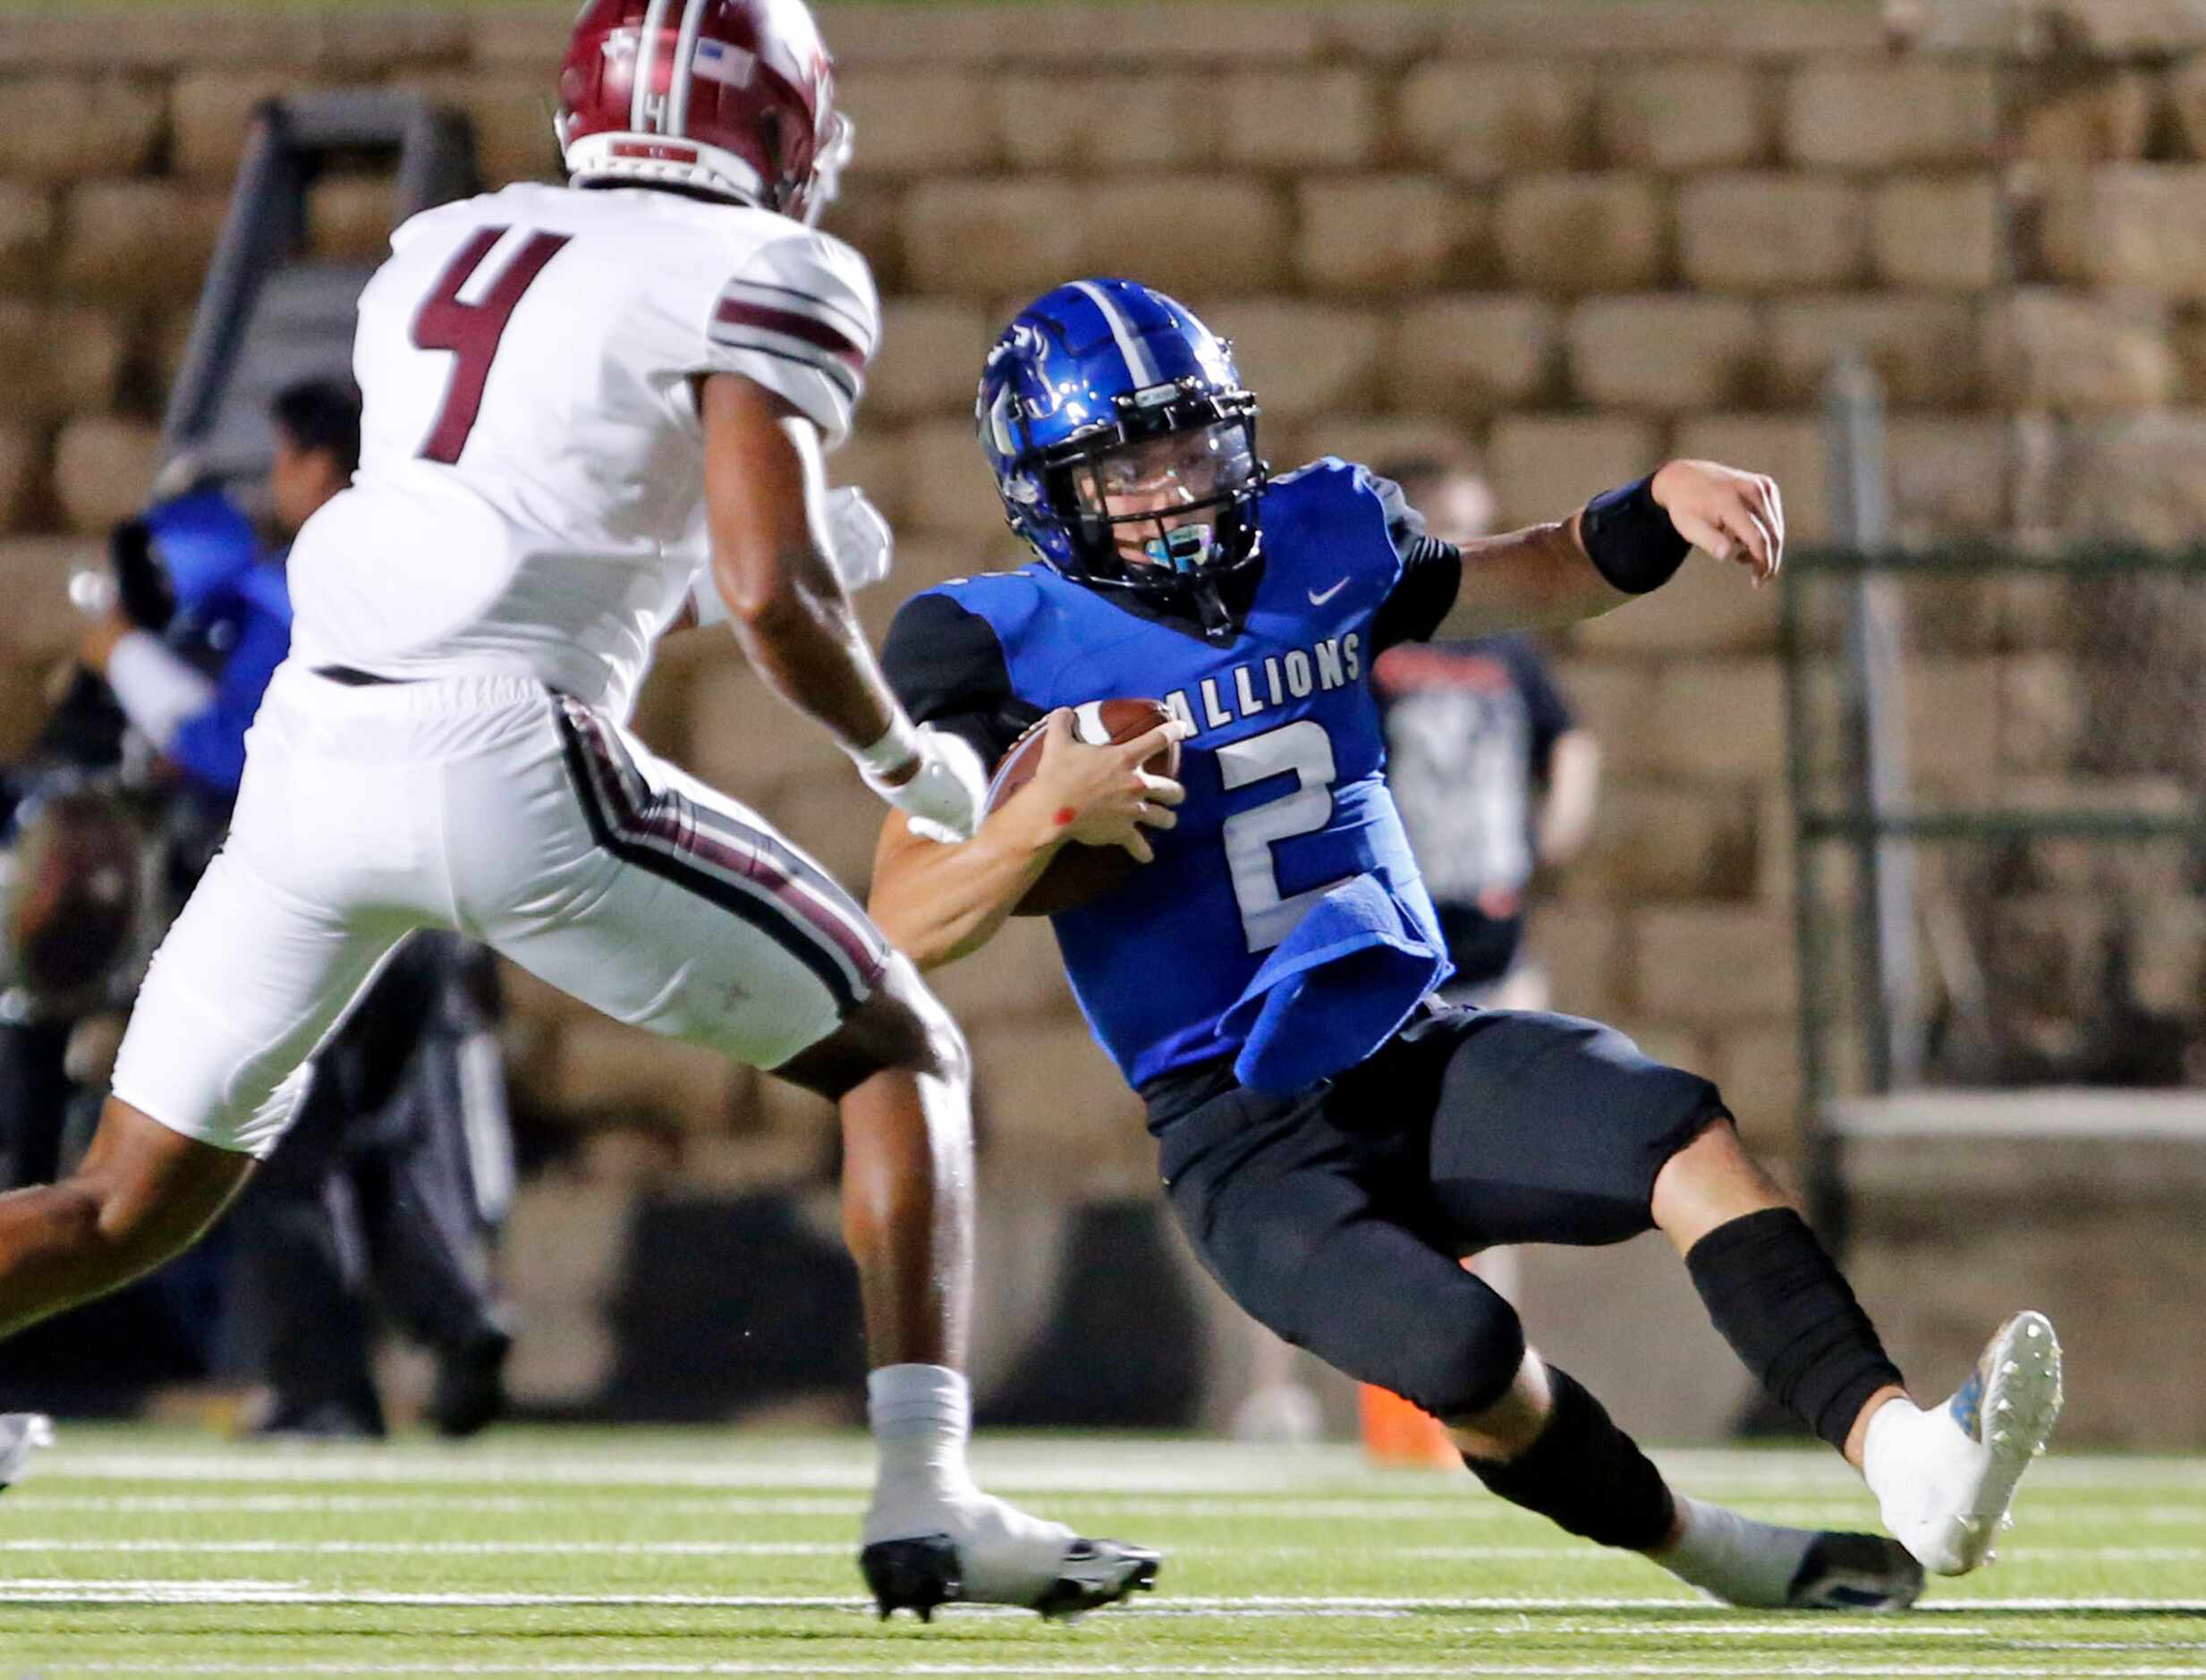 North Mesquite QB Luke Seder (2) scrambles and slides for a first down, as Mesquite defender...